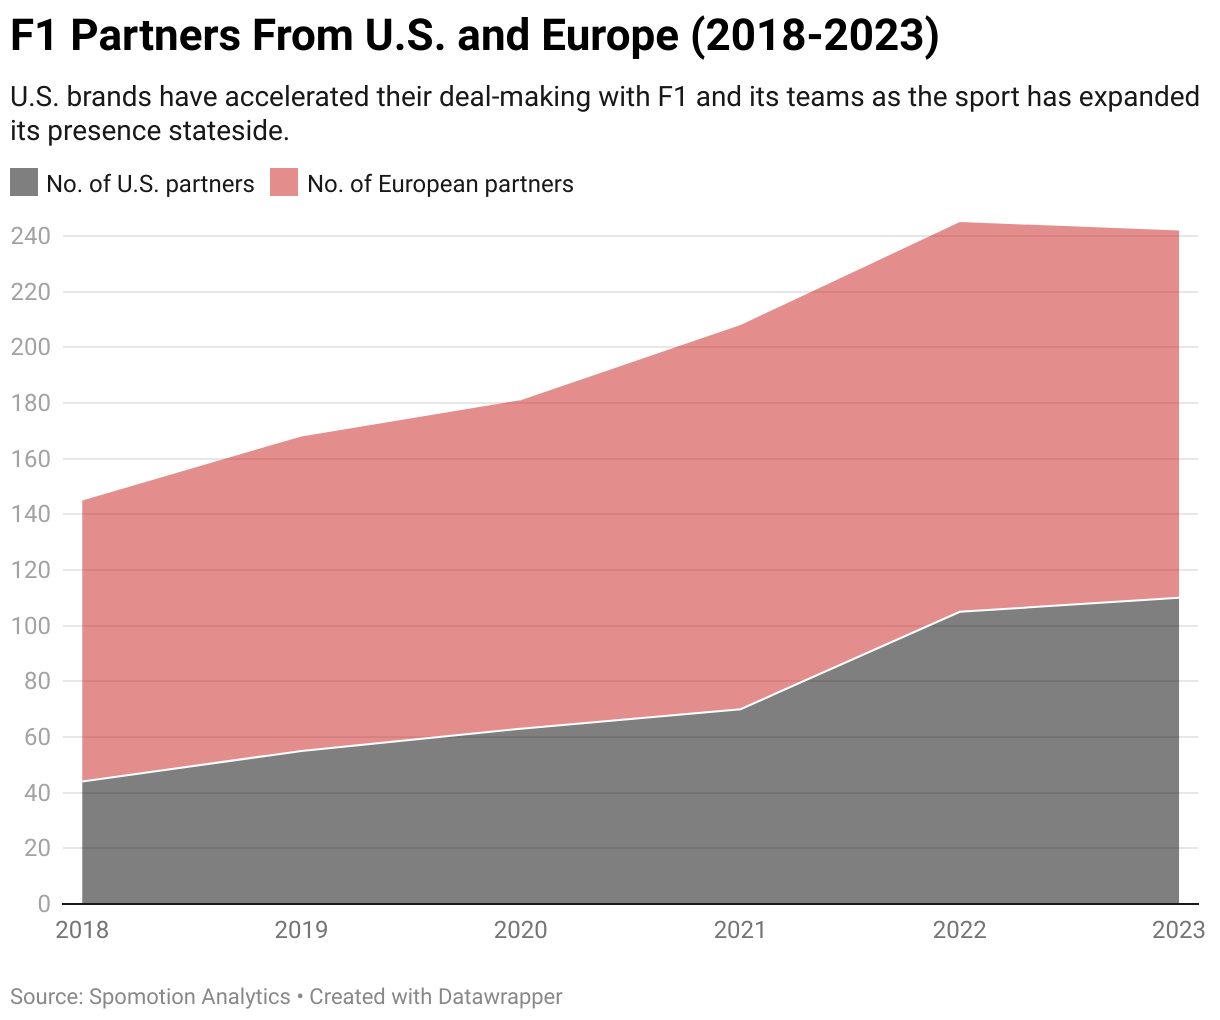 f1 growth in US vs Europe 